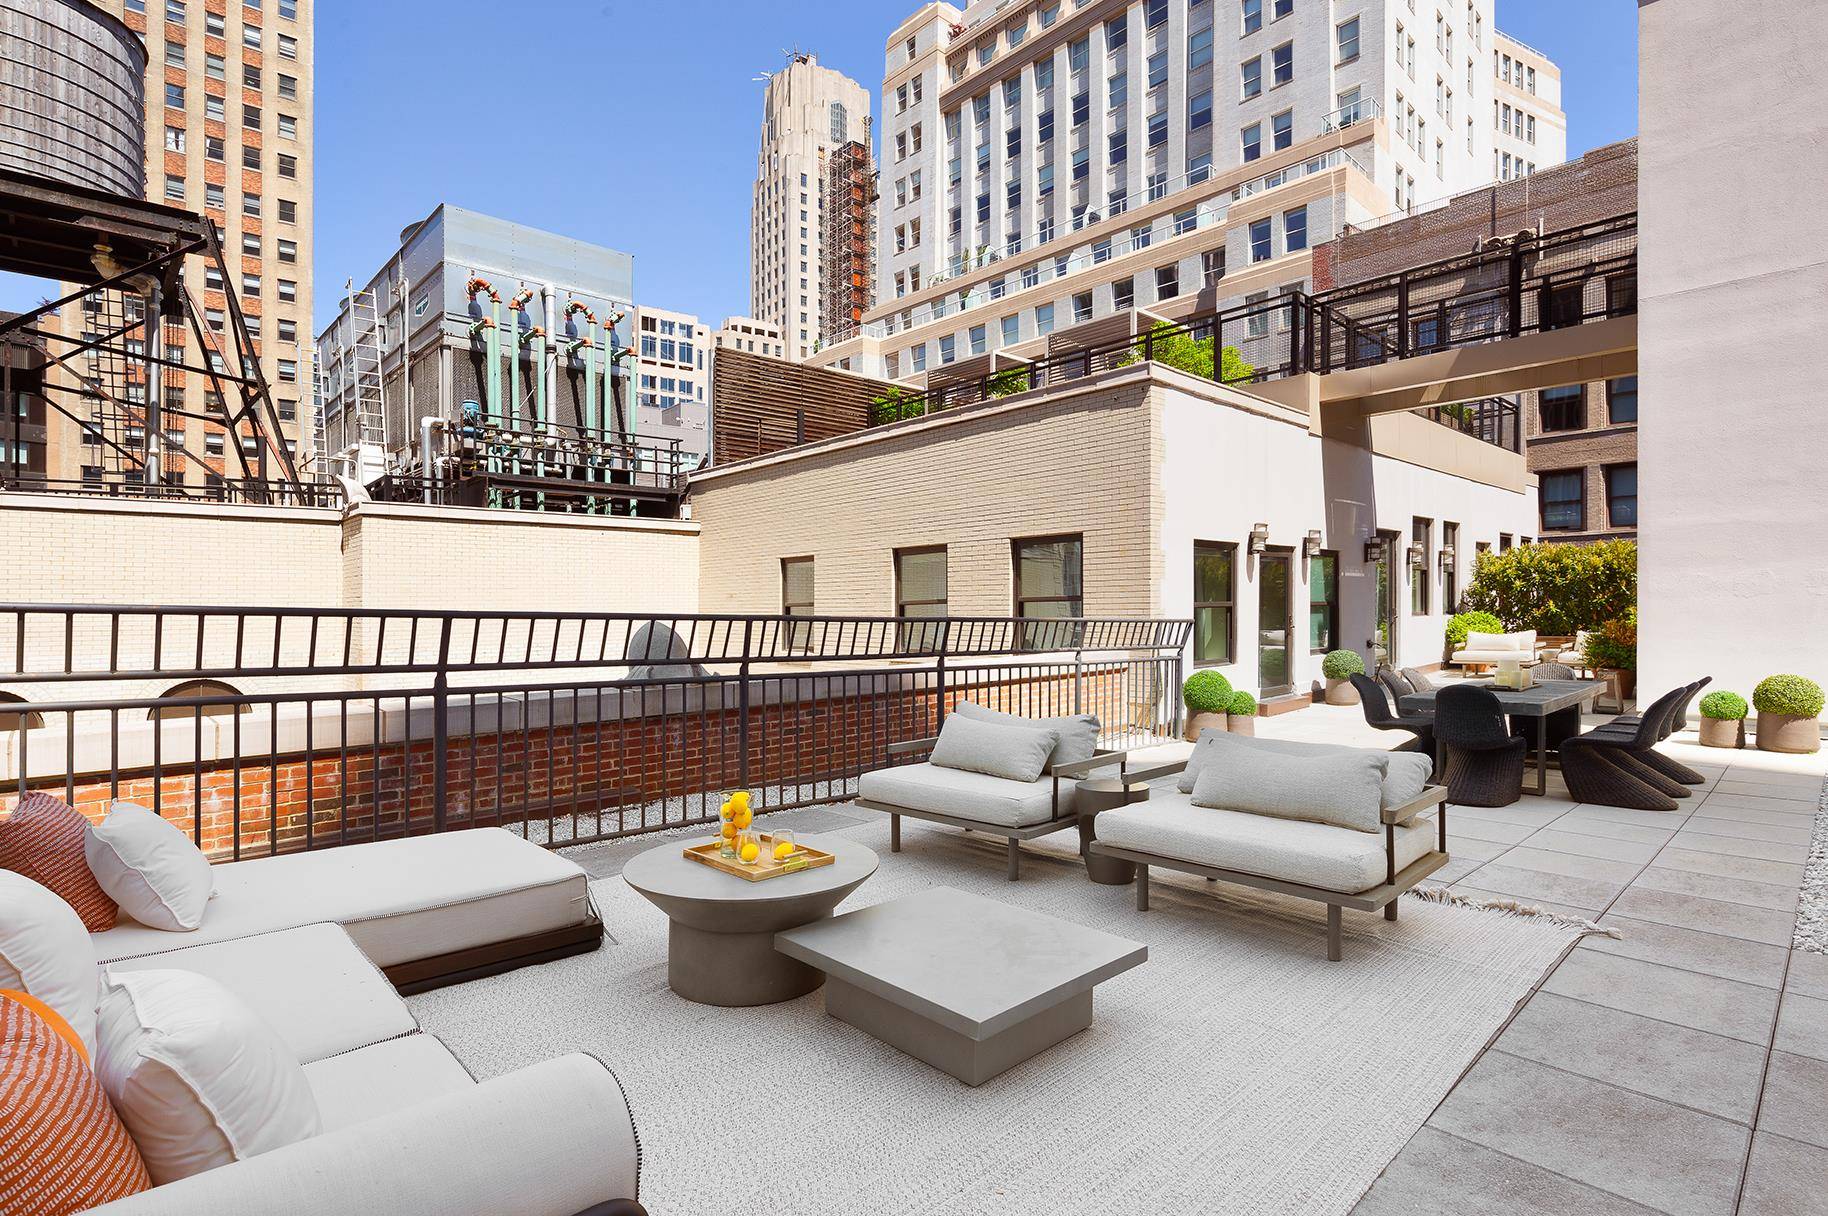 INCLUDES PRIVATE STORAGEWelcome to the Financial District landmark, The Broad Exchange Building.